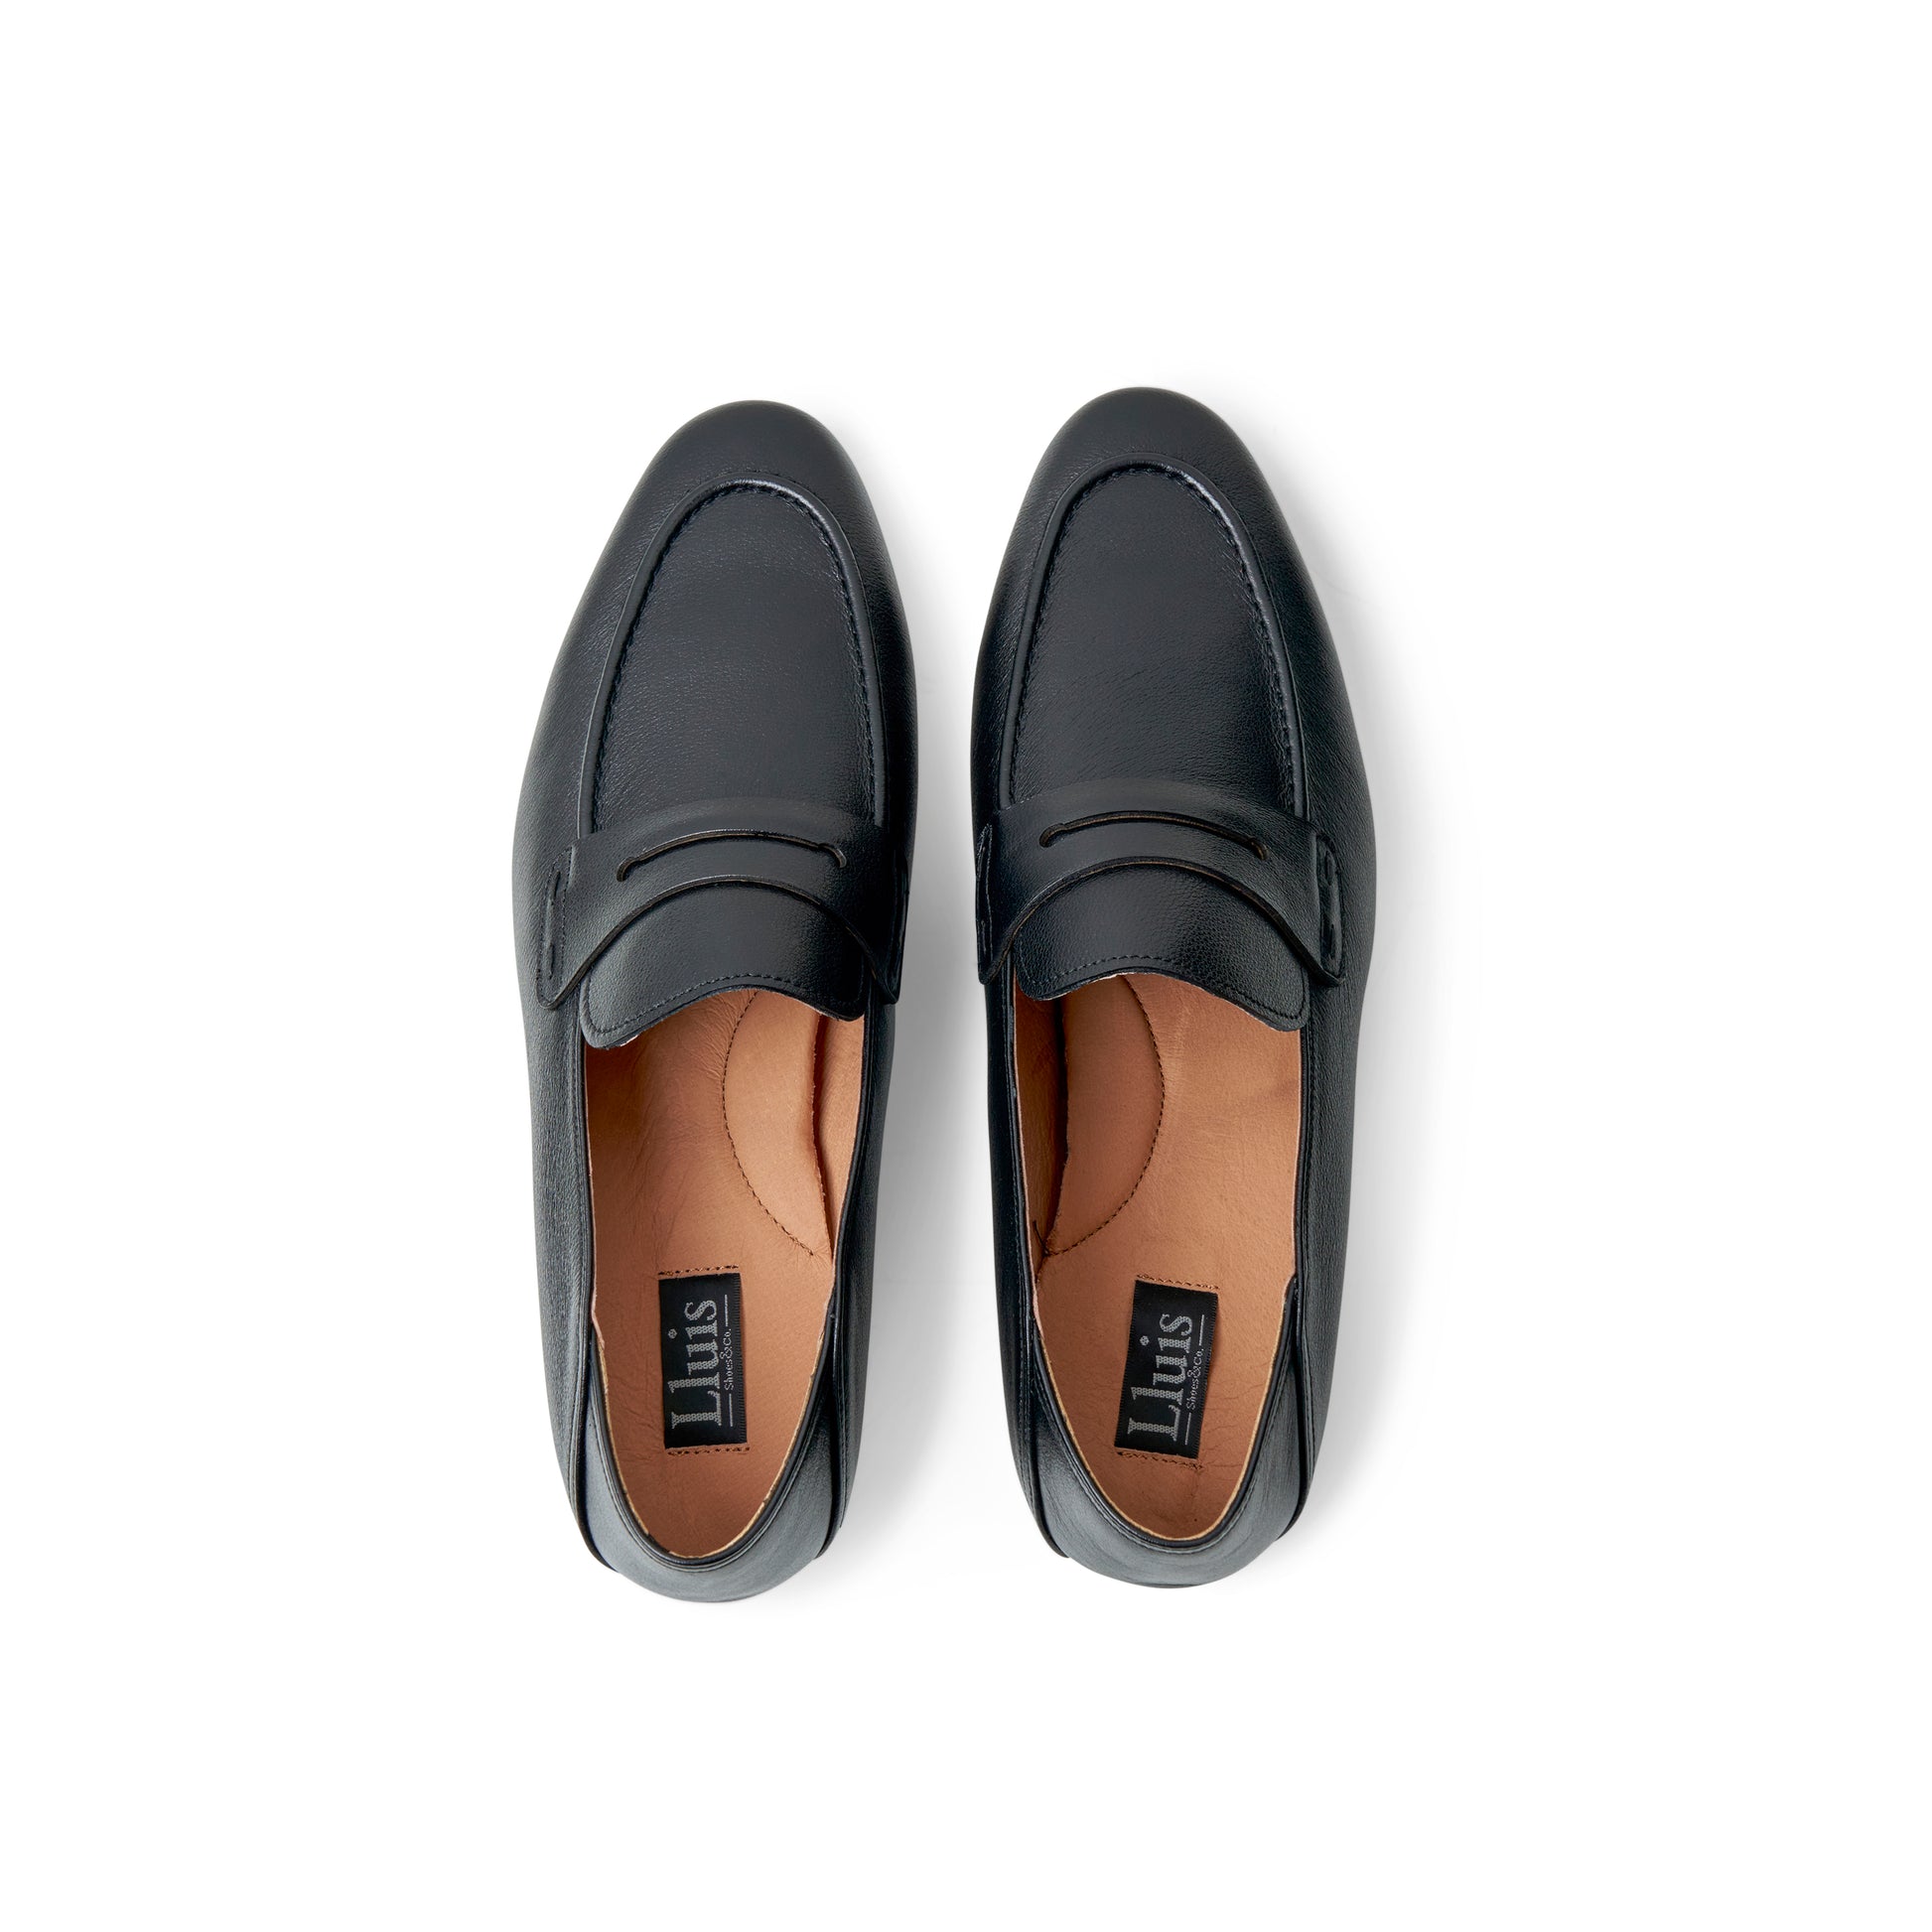 Top View of Alexi Loafers in Black